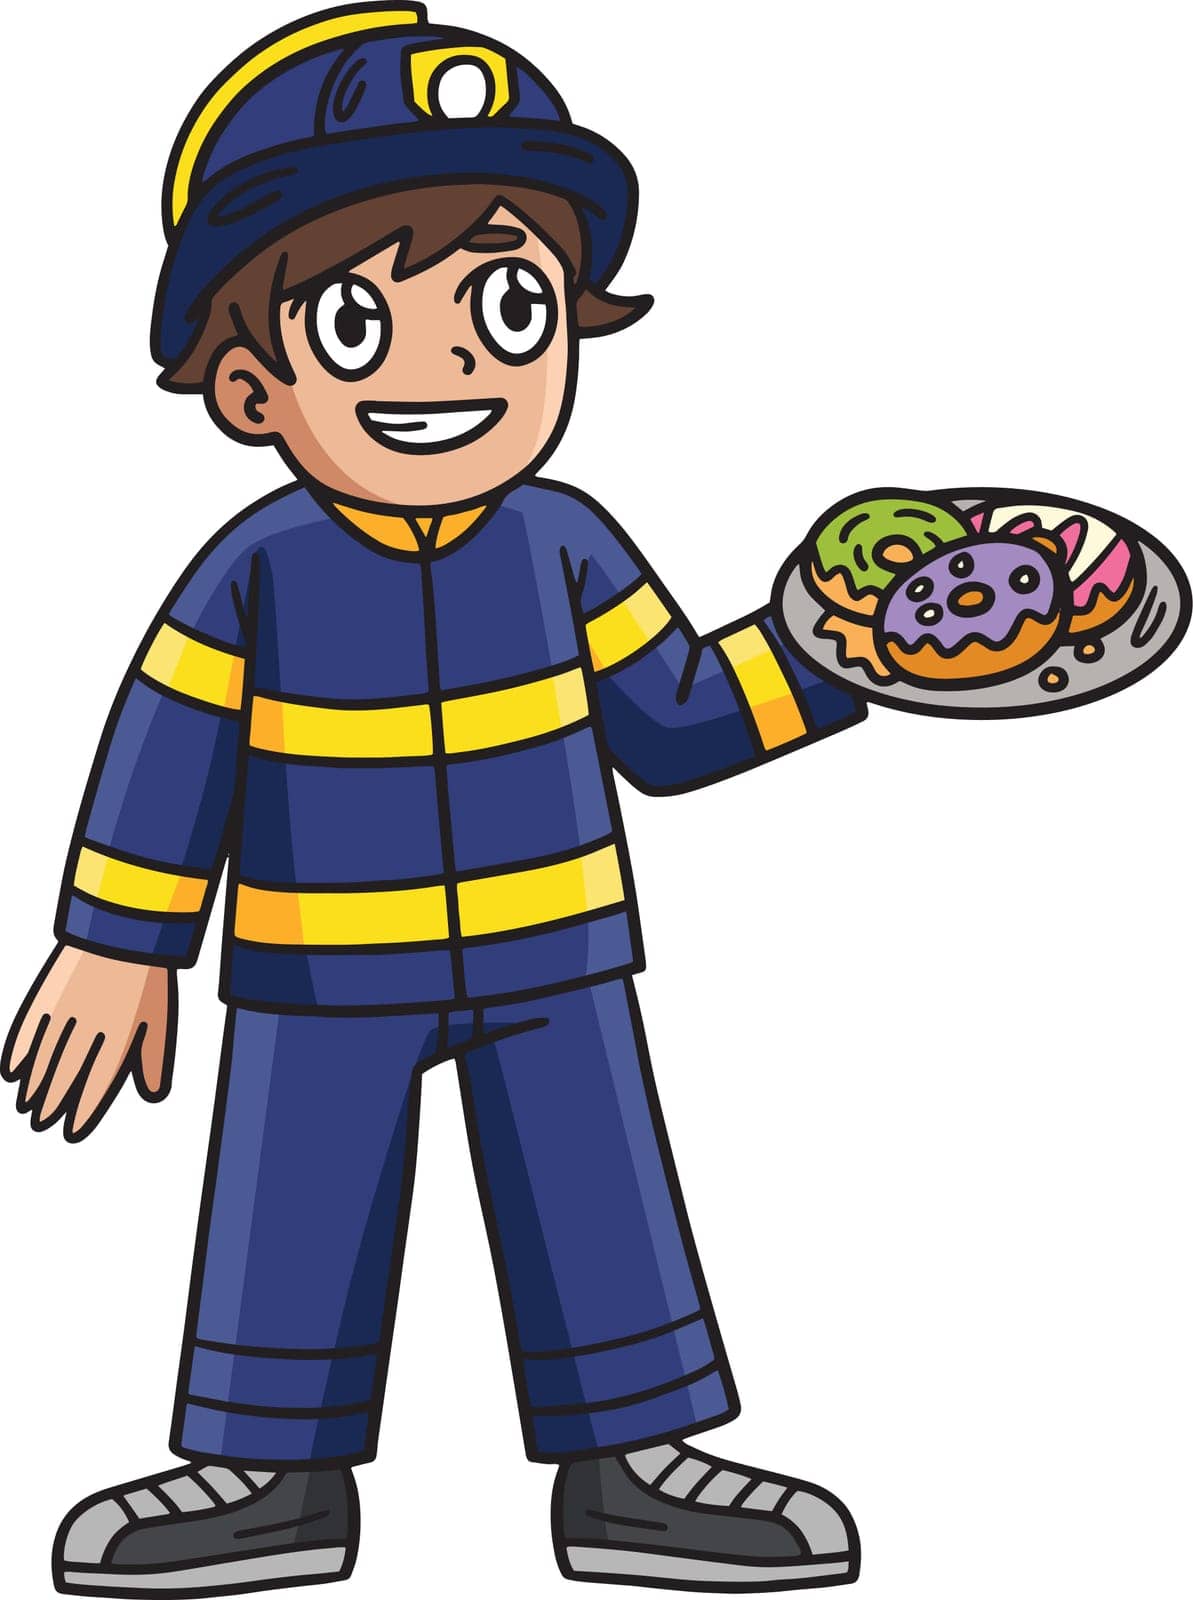 This cartoon clipart shows a Firefighter with a Donut illustration.